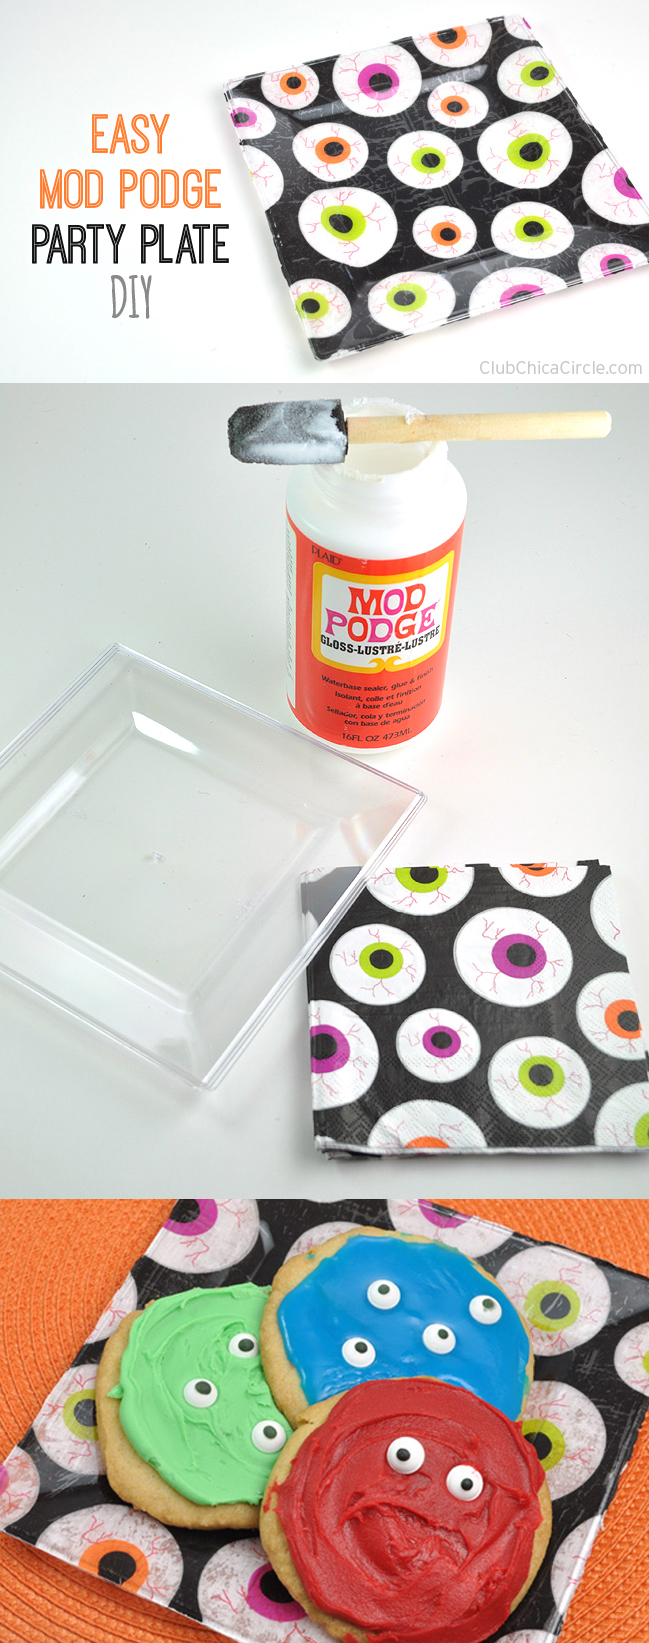 Easy Eyeball party plate craft idea with mod podge